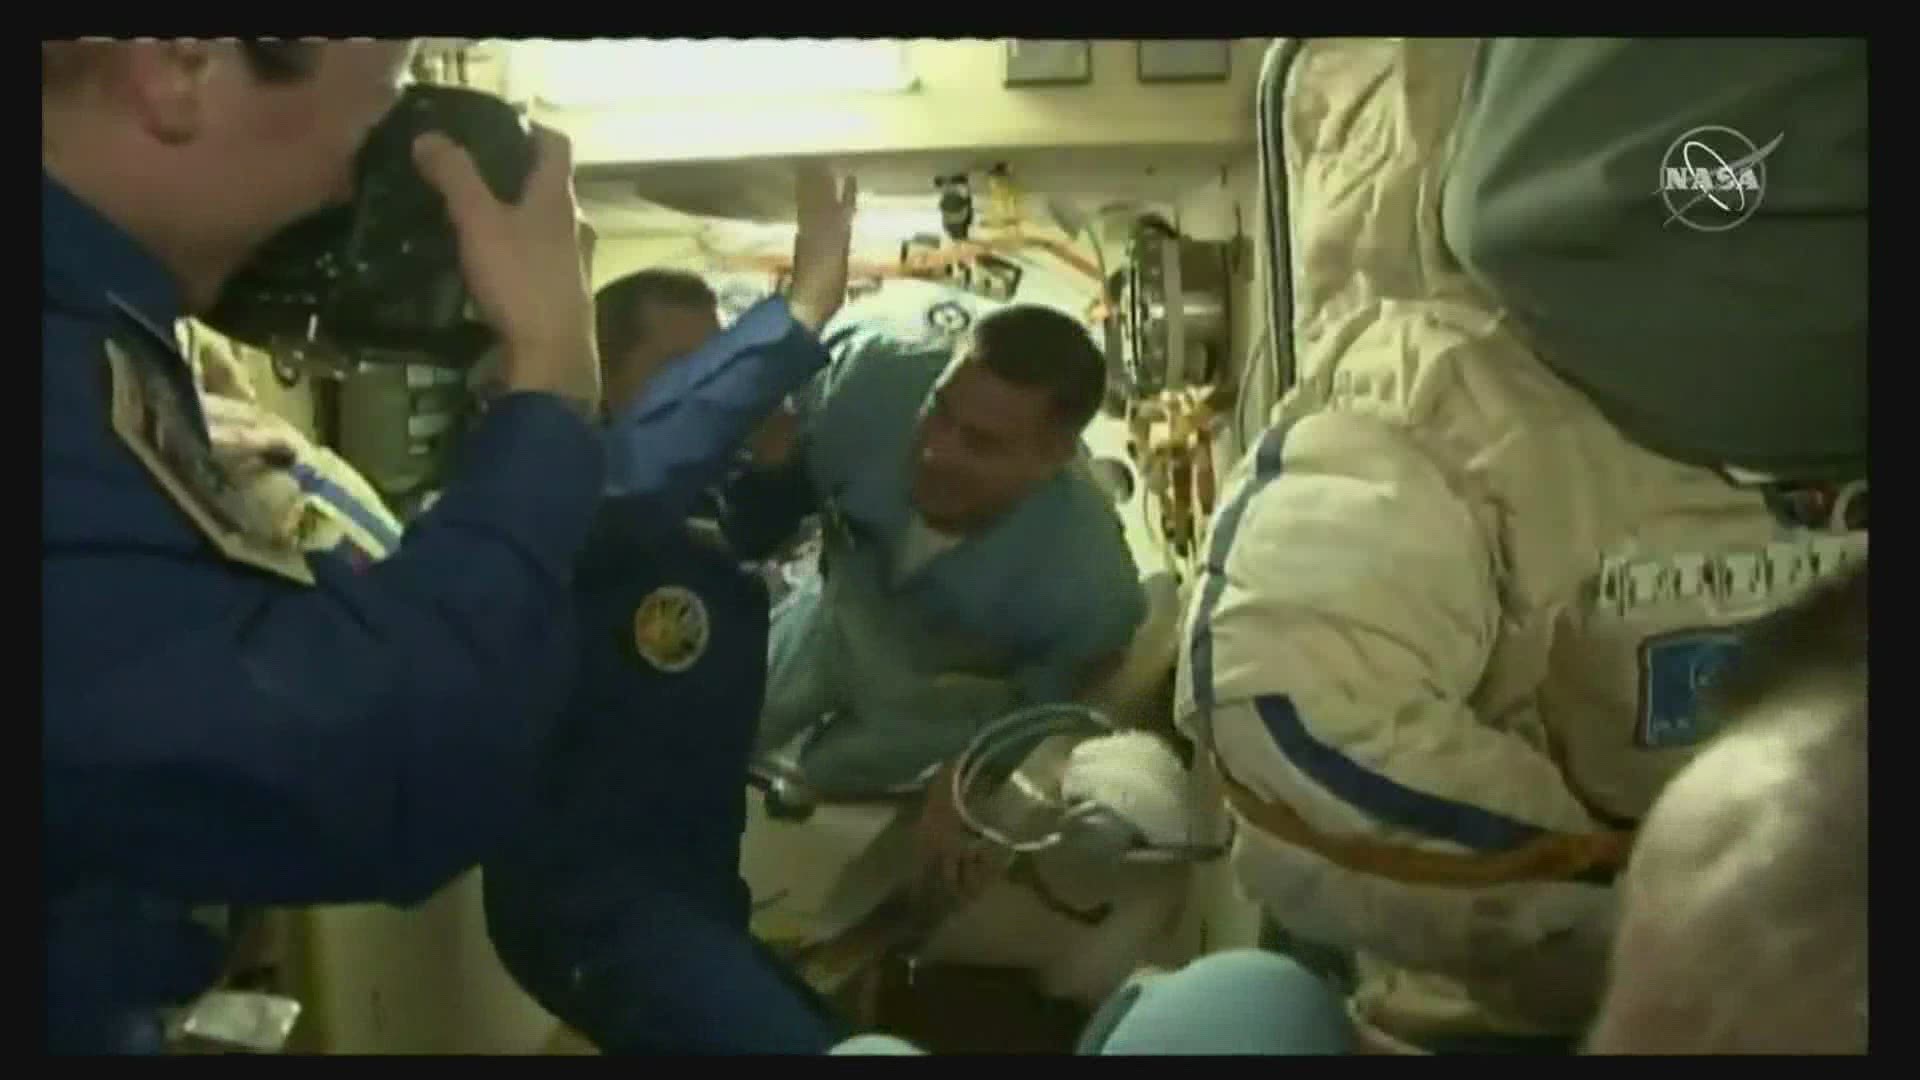 Maine astronauts Chris Cassidy and Jessica Meir meet aboard the International Space Station